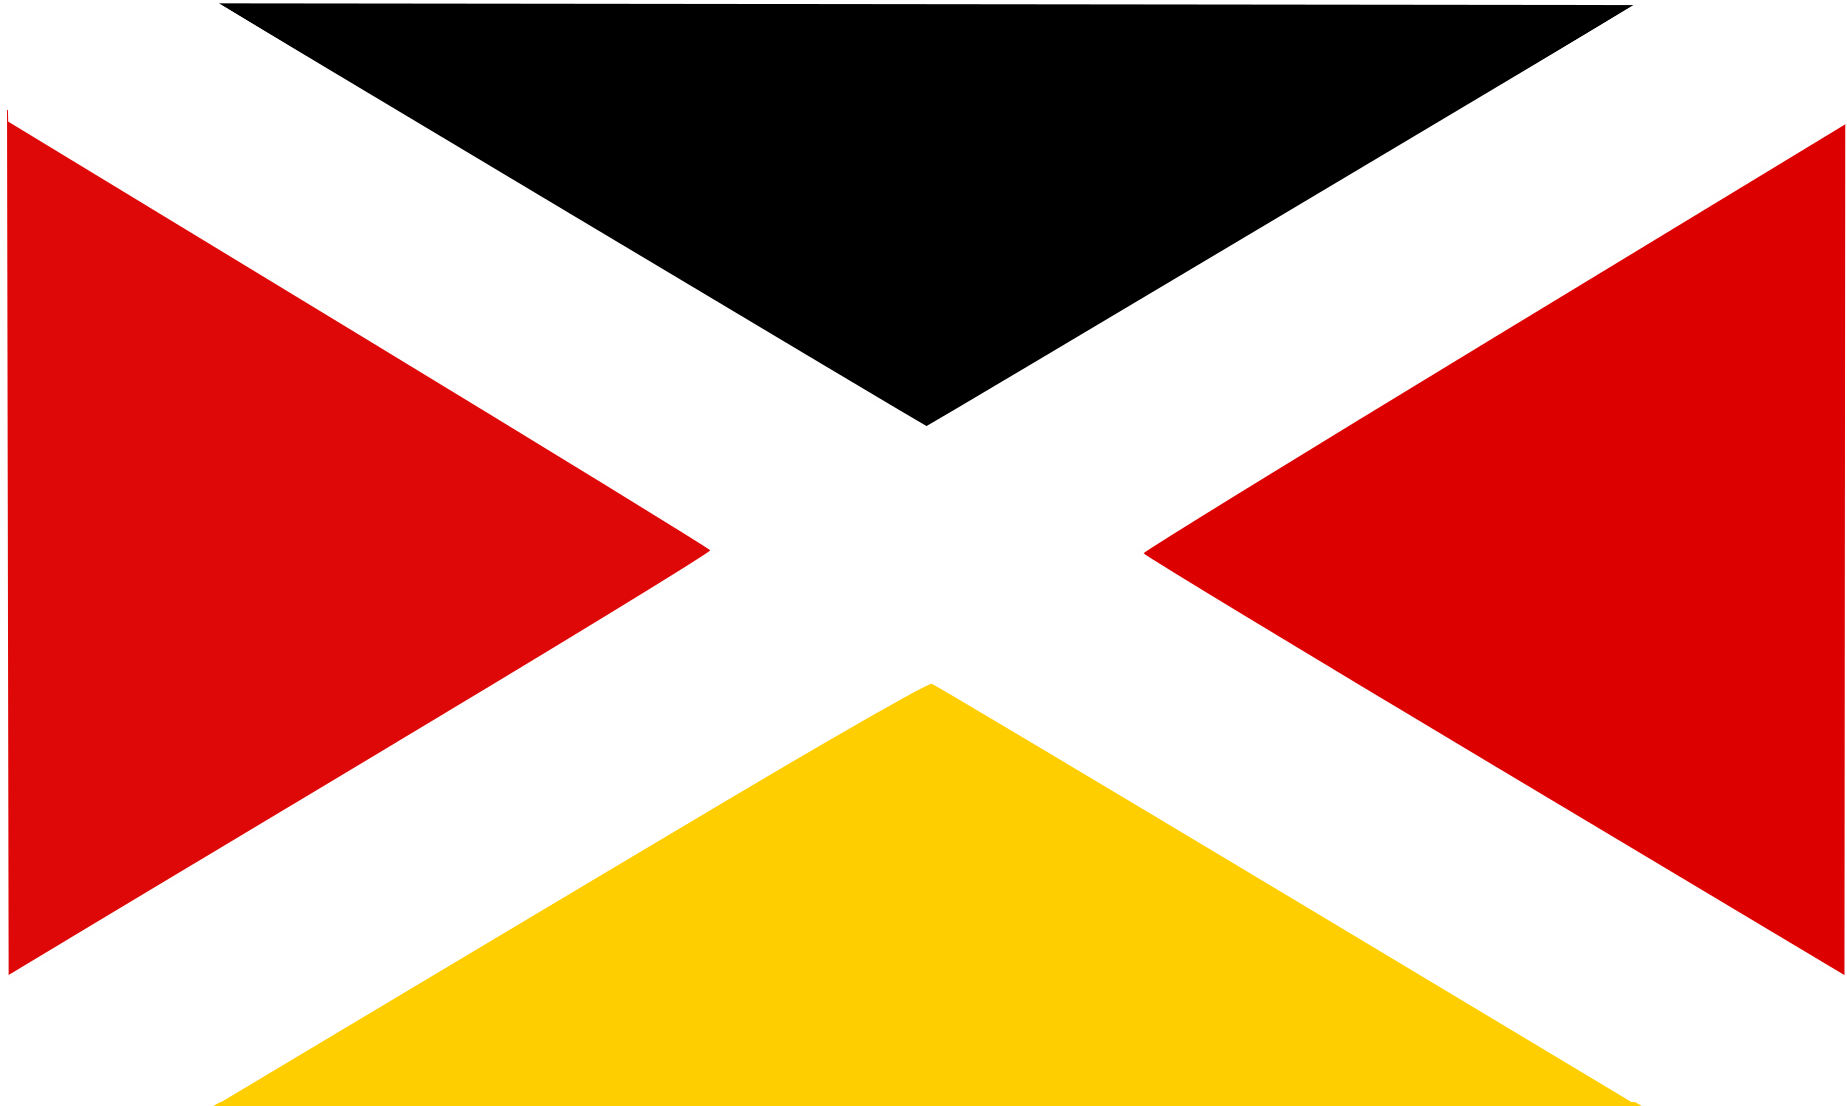 A Red White And Yellow Triangle And X